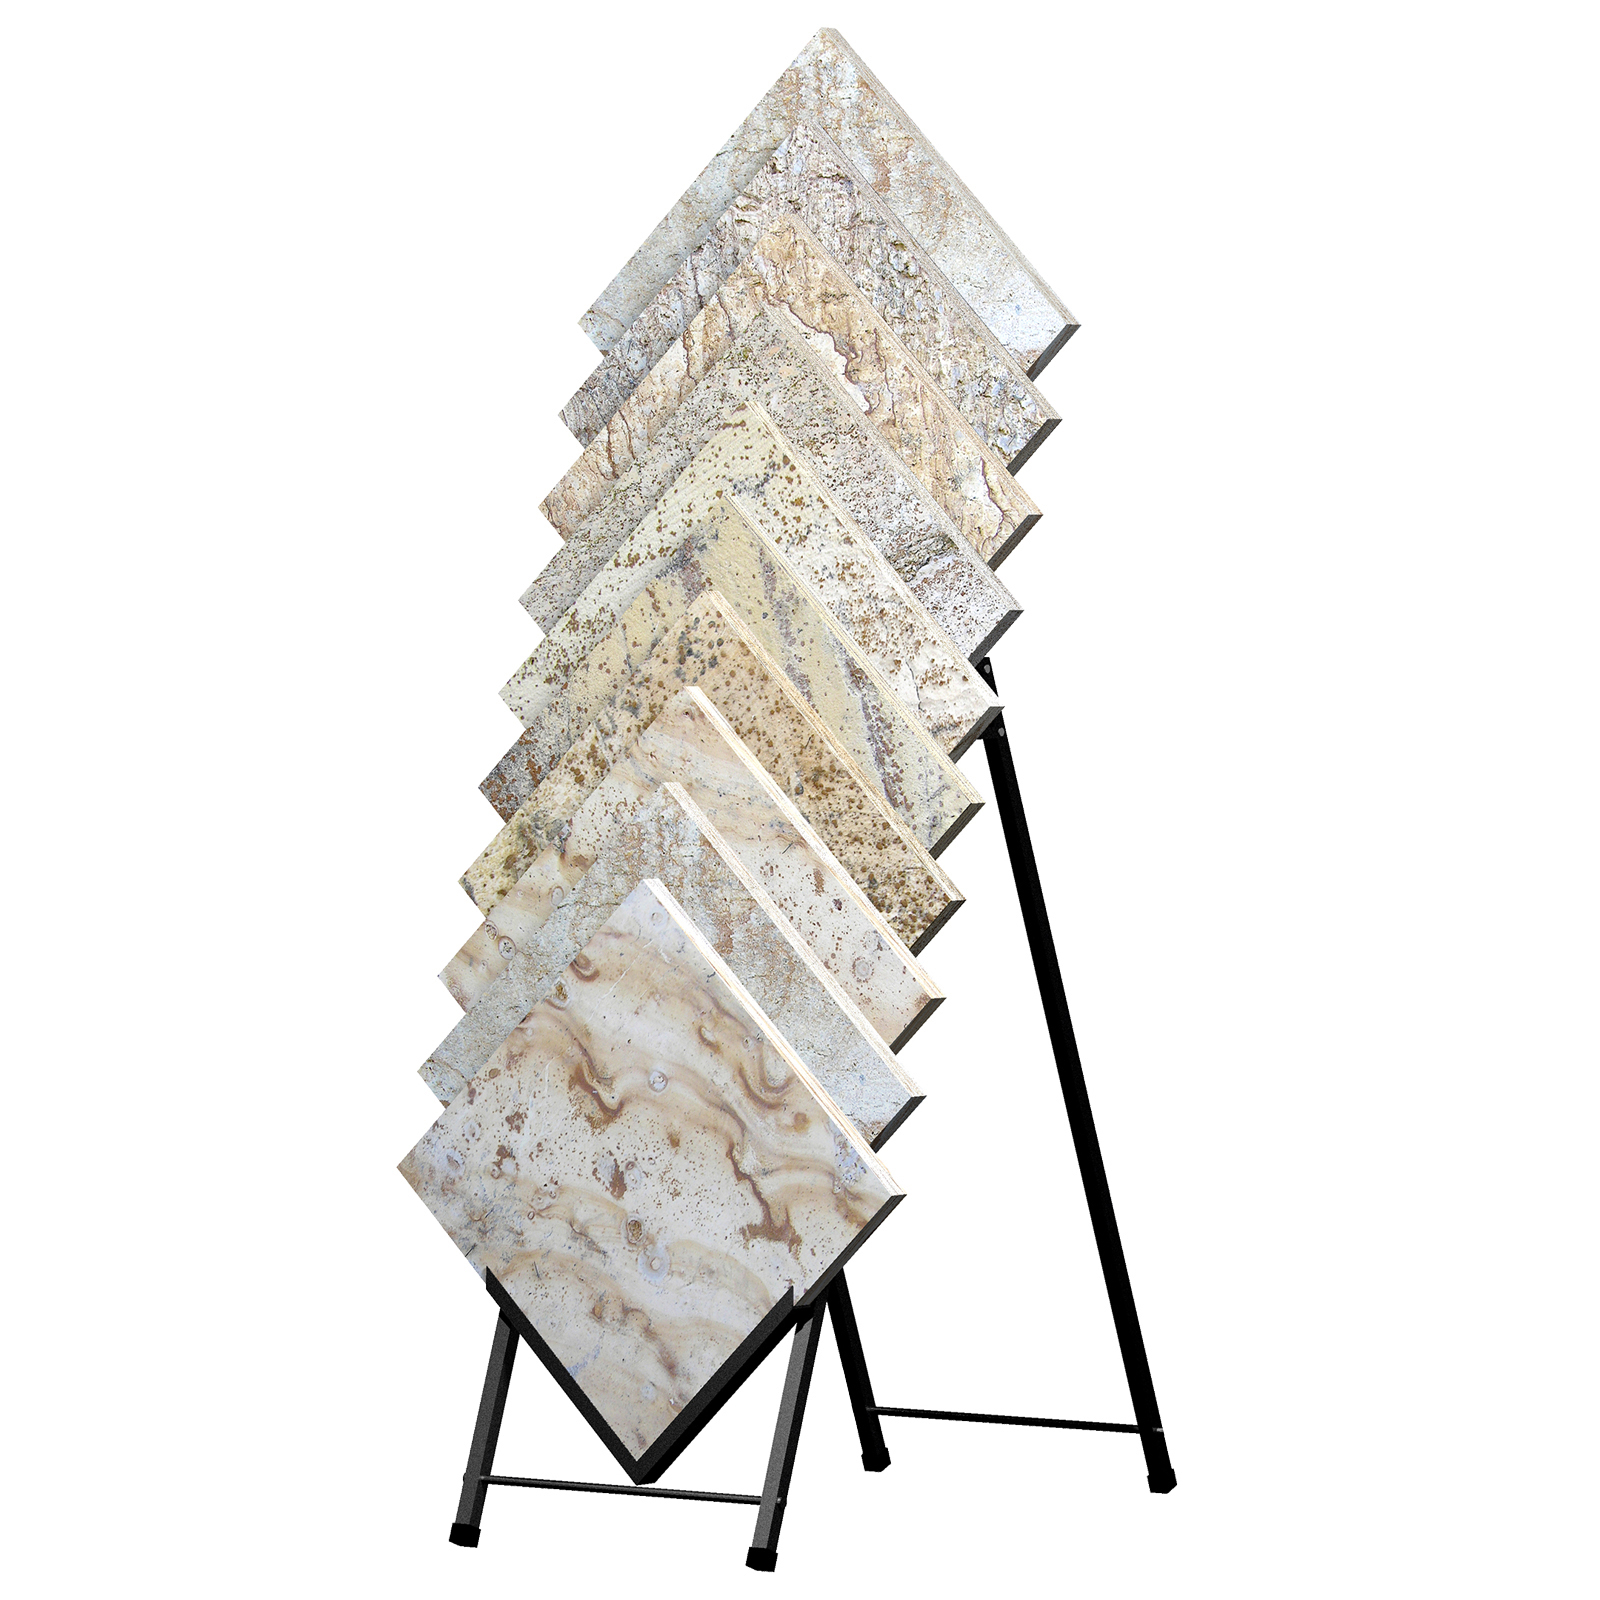 Low Cost A10 Stone and Tile Display holds thick marble granite travertine samples